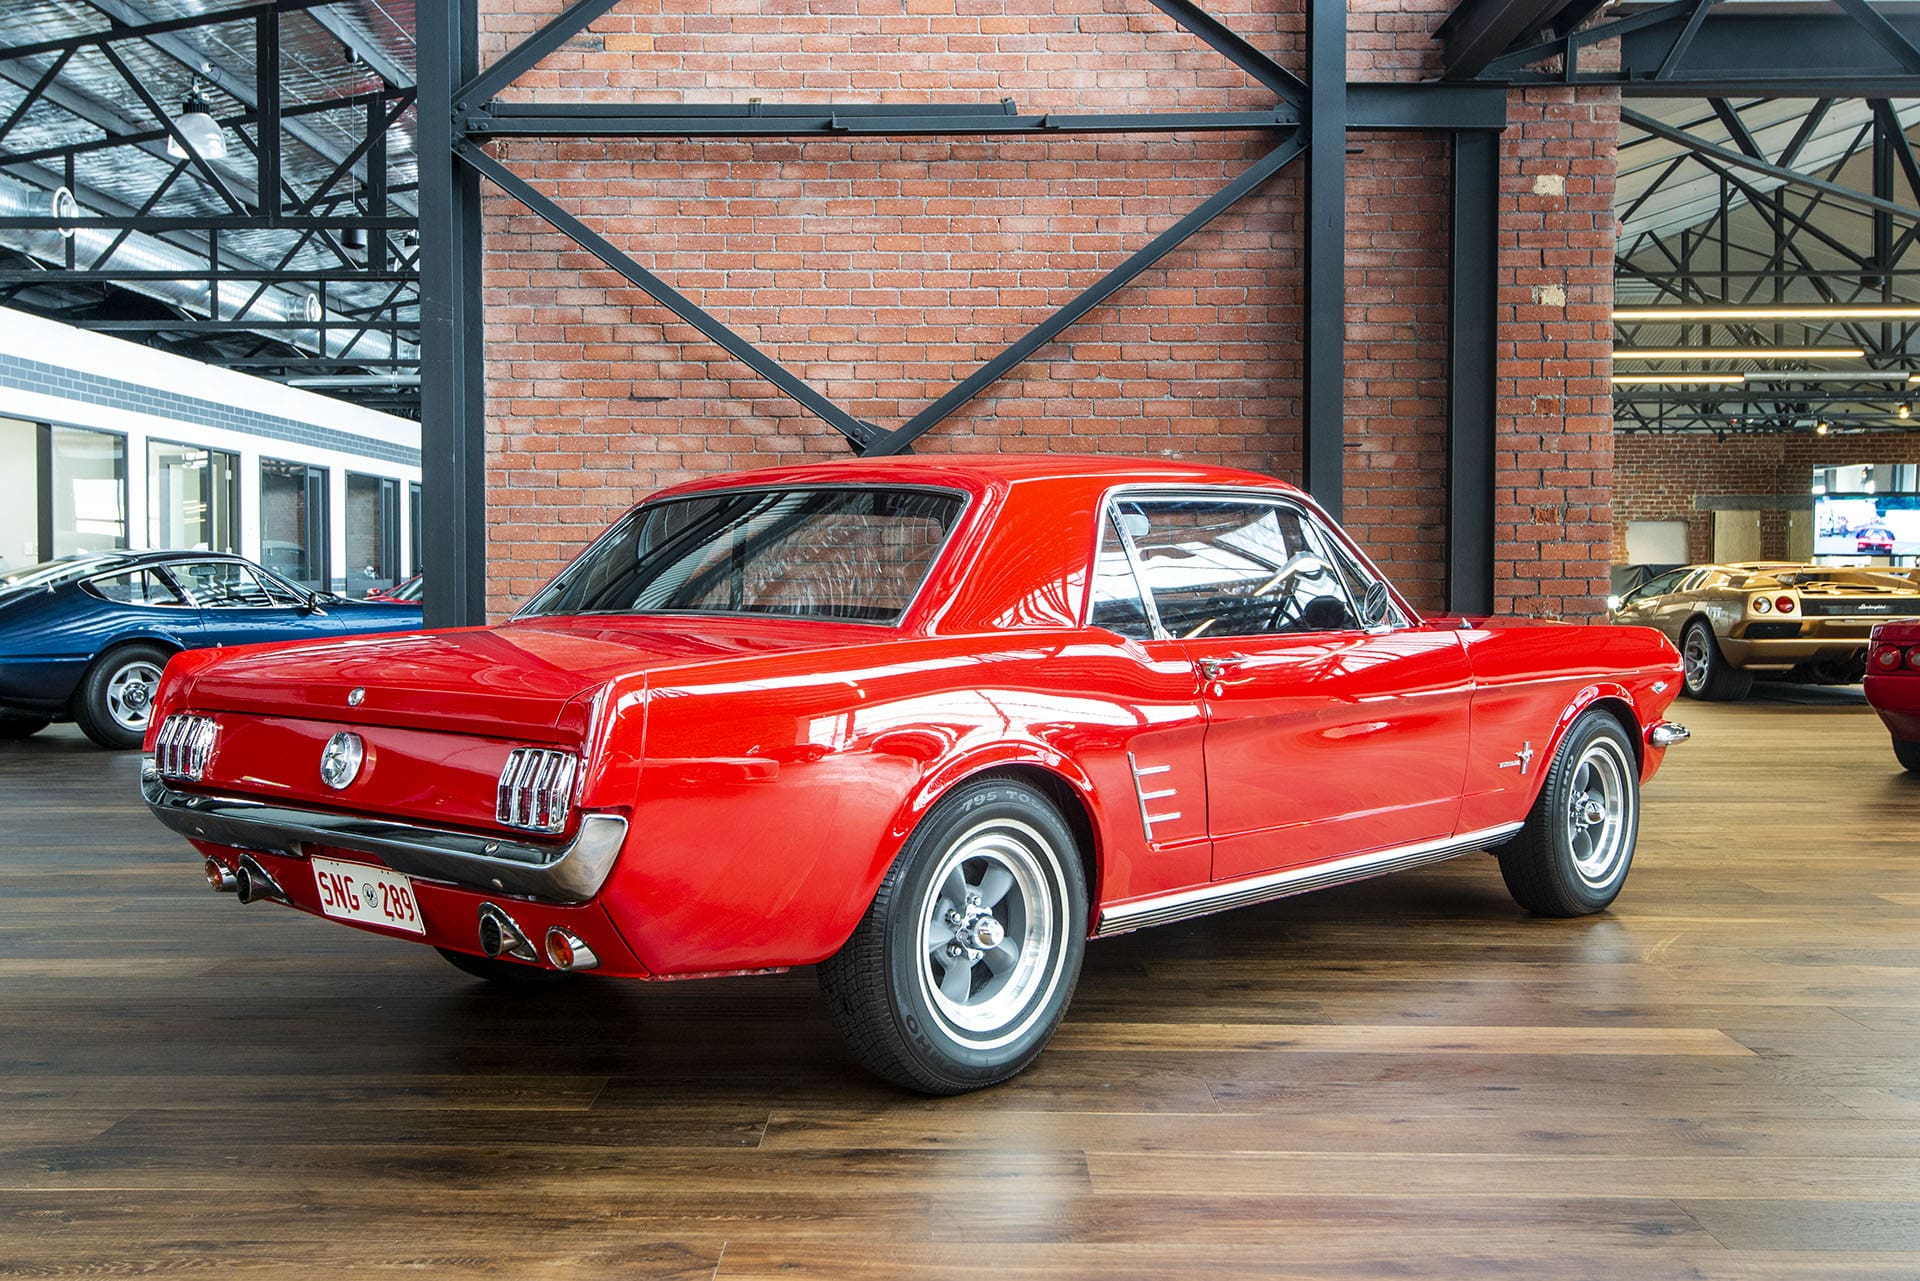 1966 Ford Mustang Hardtop - Richmonds